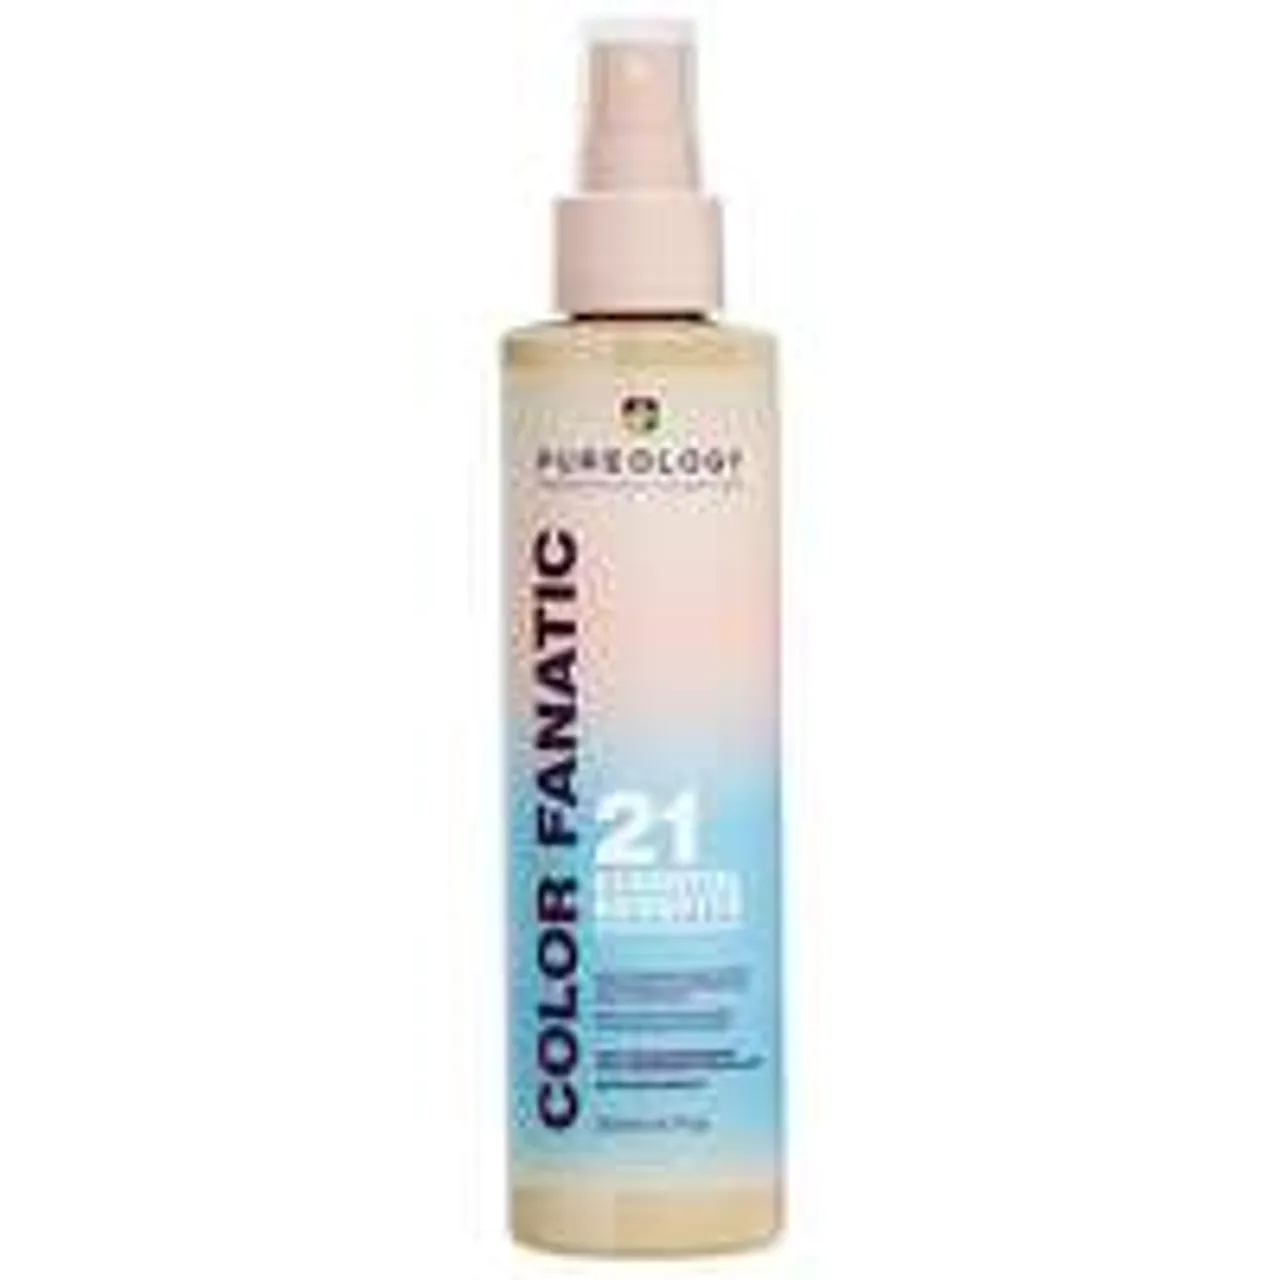 Pureology Color Fanatic Multi Tasking Leave-In Spray 200ml